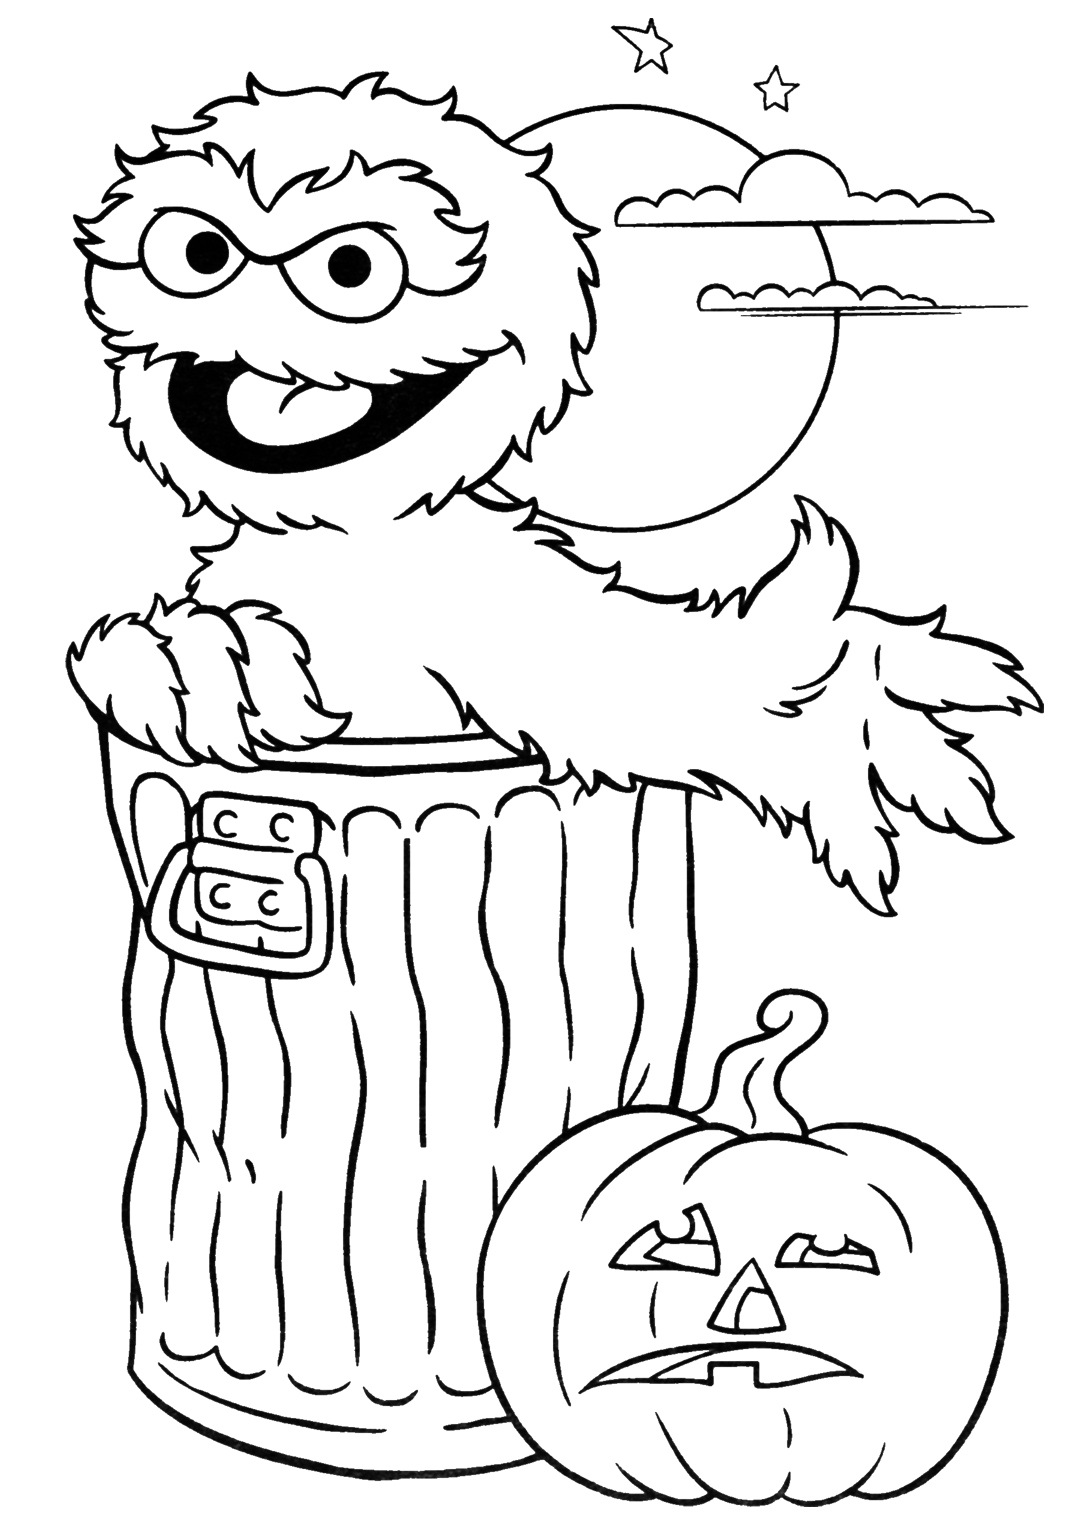 24 Free Halloween Coloring Pages For Kids Effy Moom Free Coloring Picture wallpaper give a chance to color on the wall without getting in trouble! Fill the walls of your home or office with stress-relieving [effymoom.blogspot.com]